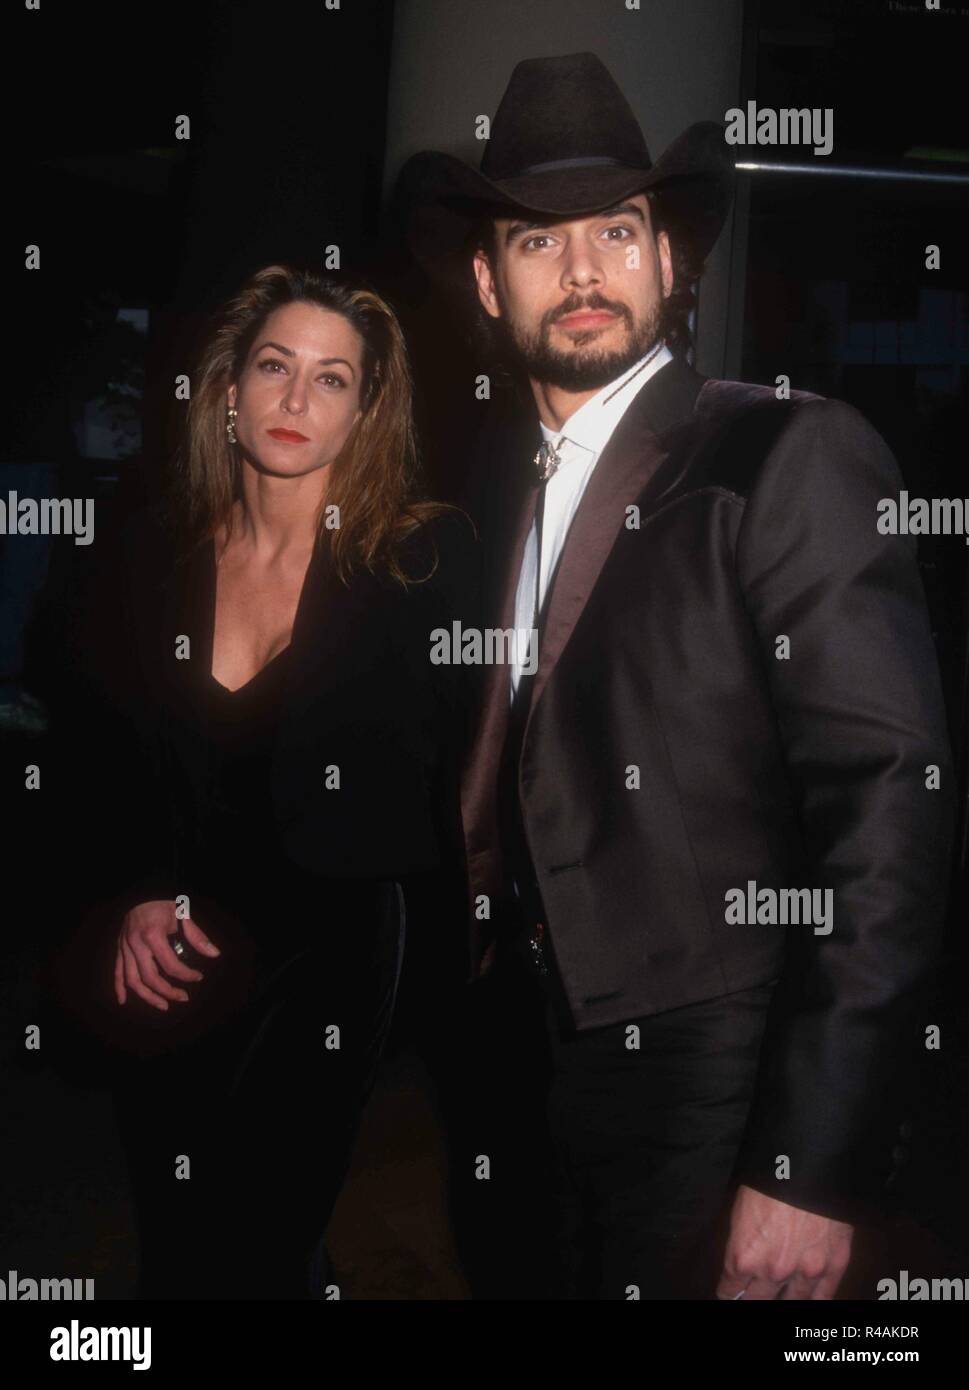 BEVERLY HILLS, CA - FEBRUARY 26: Actor Robert Kelker-Kelly attends the Ninth Annual Soap Opera Digest Awards on February 26, 1993 at the Beverly Hilton Hotel in Beverly Hills, California. Photo by Barry King/Alamy Stock Photo Stock Photo